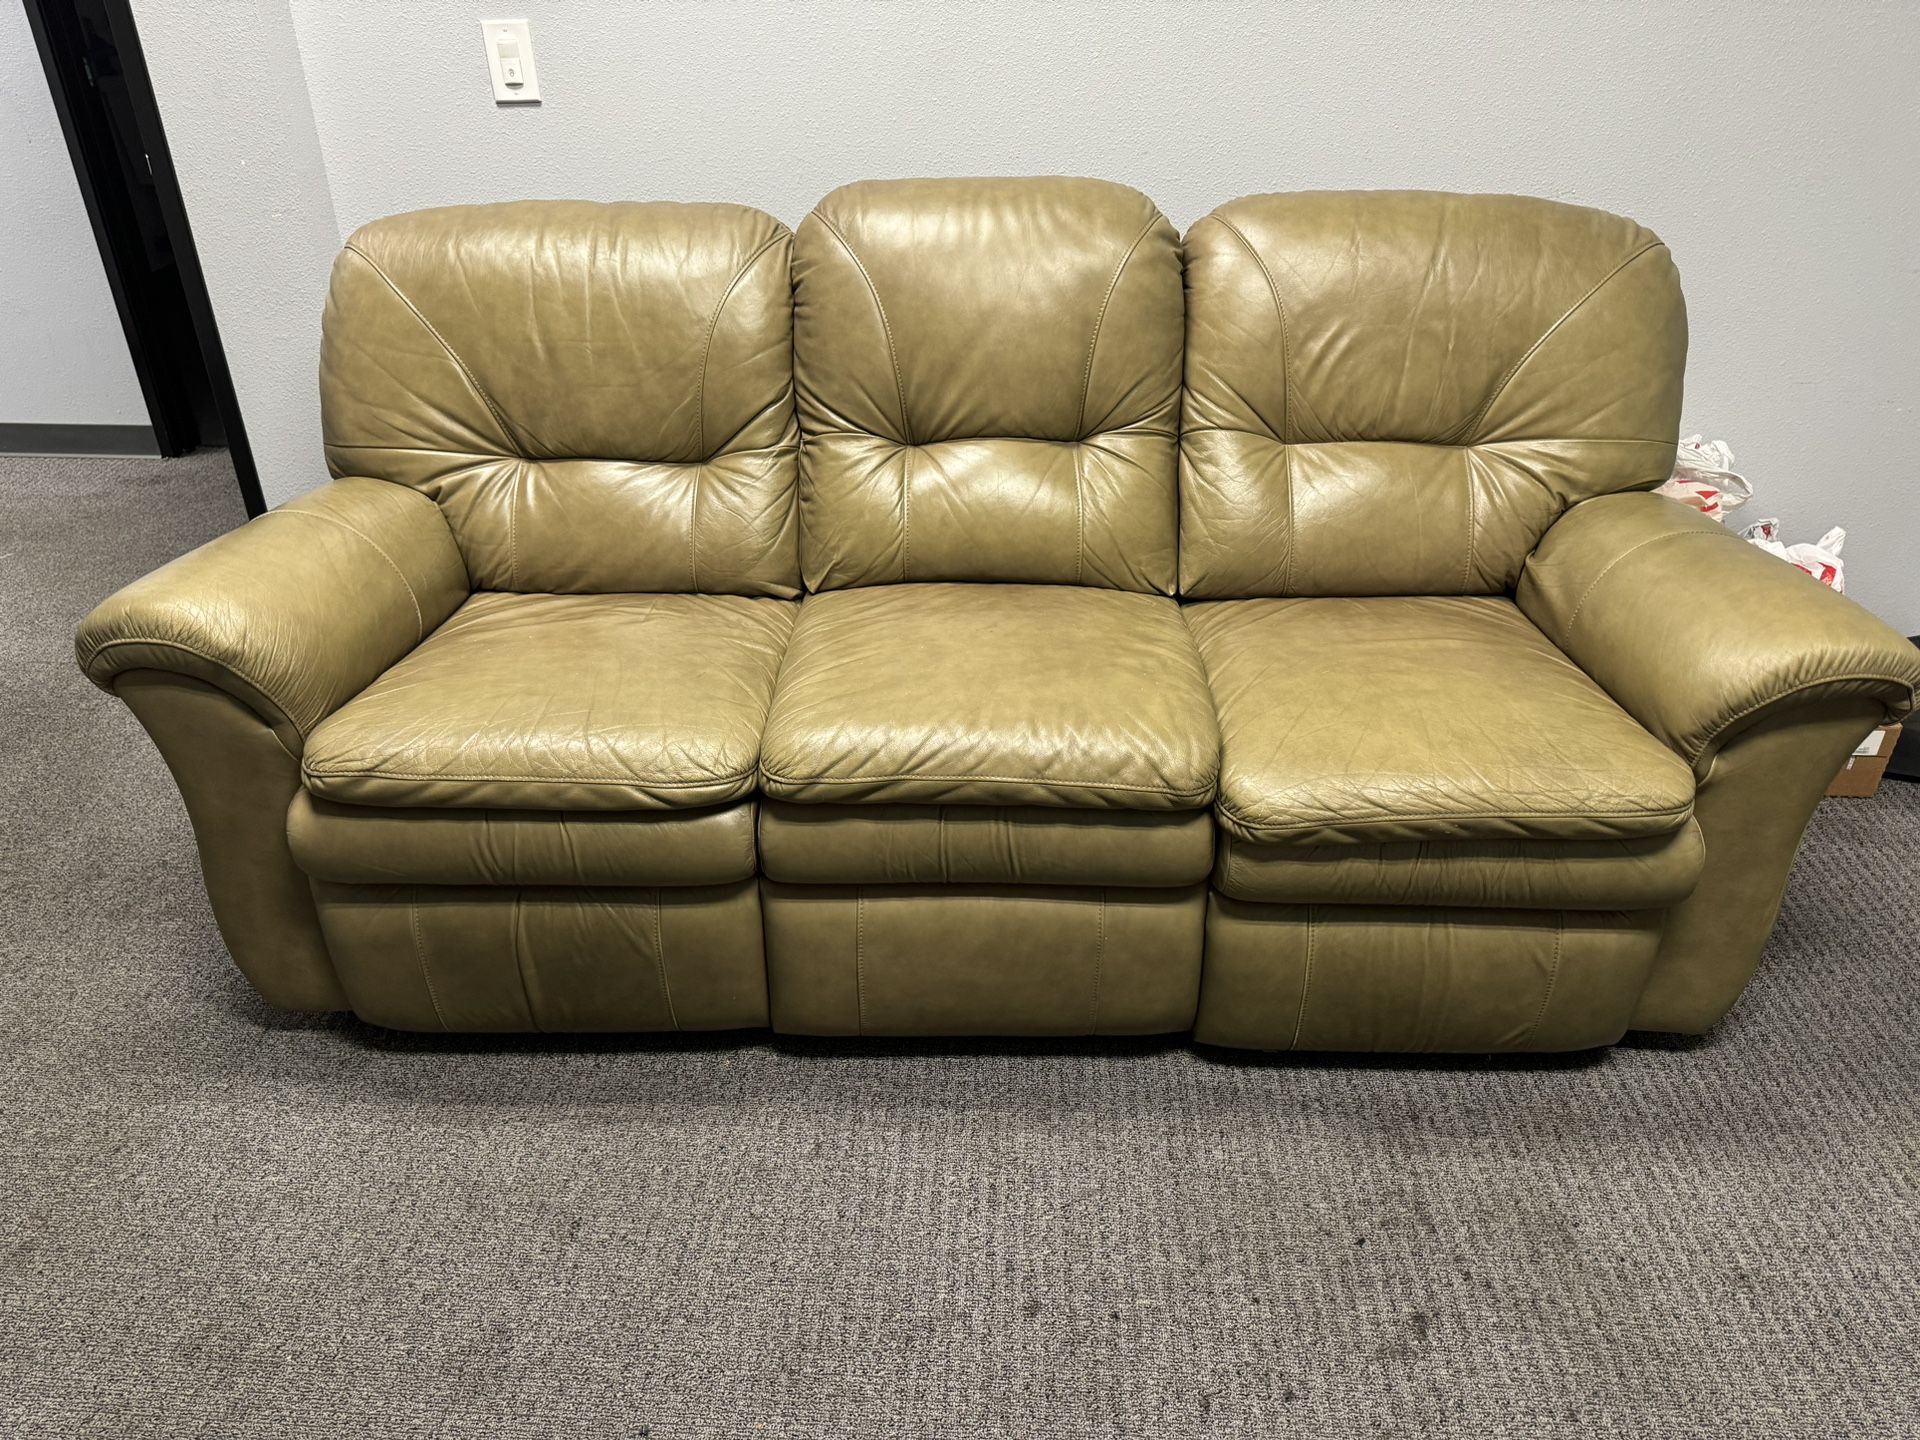 La-Z-Boy Leather Couch - Double Reclining 